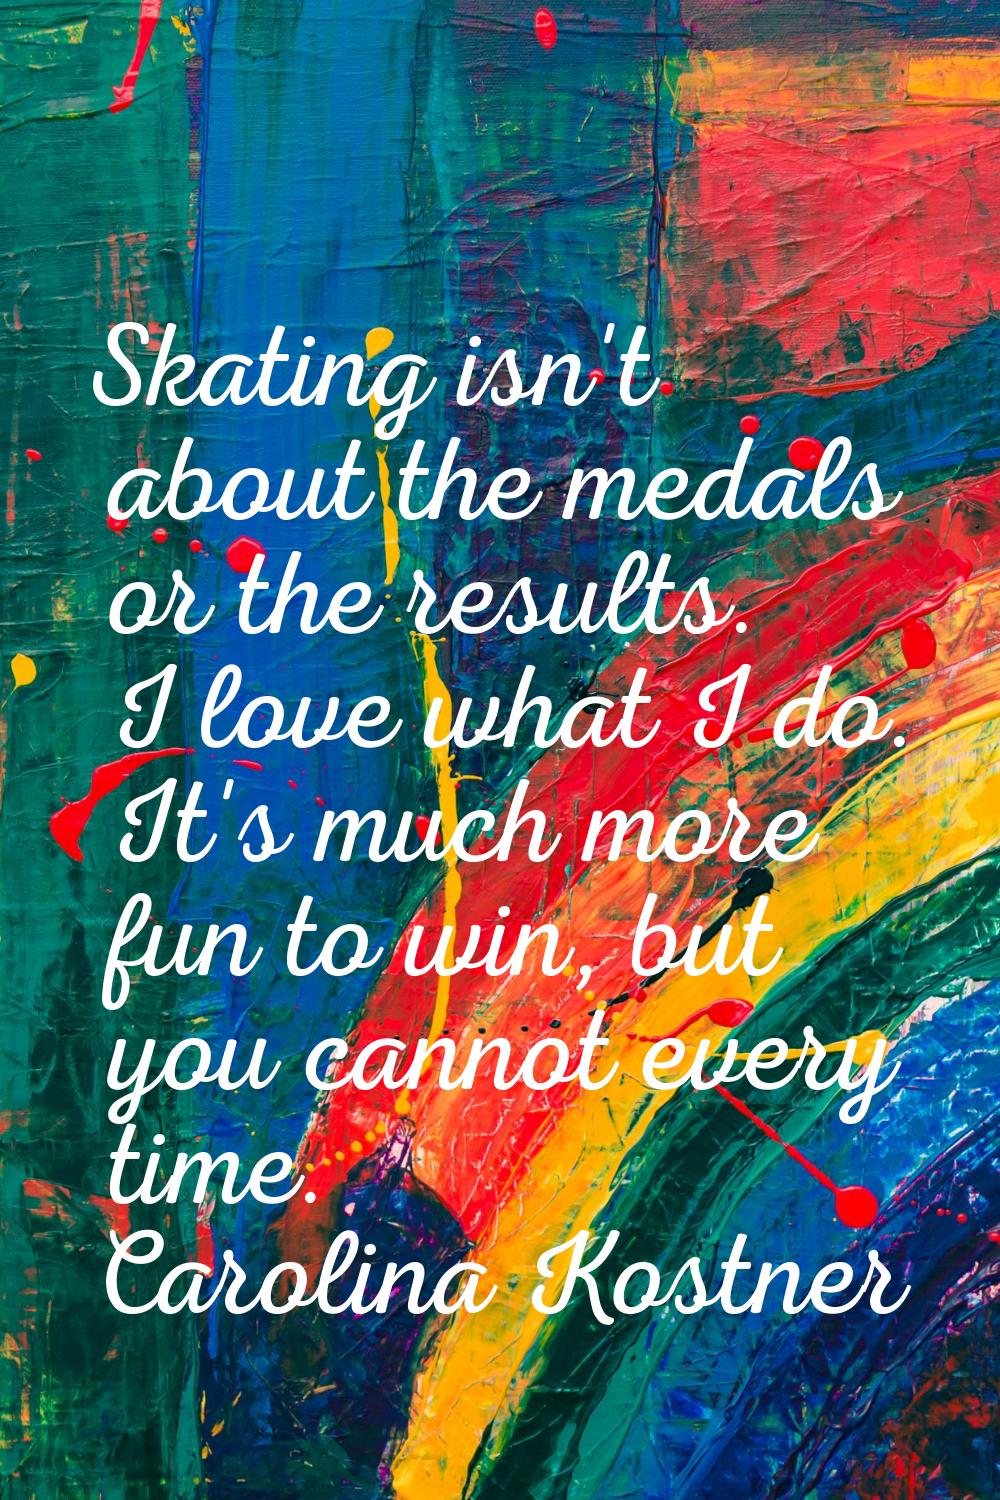 Skating isn't about the medals or the results. I love what I do. It's much more fun to win, but you